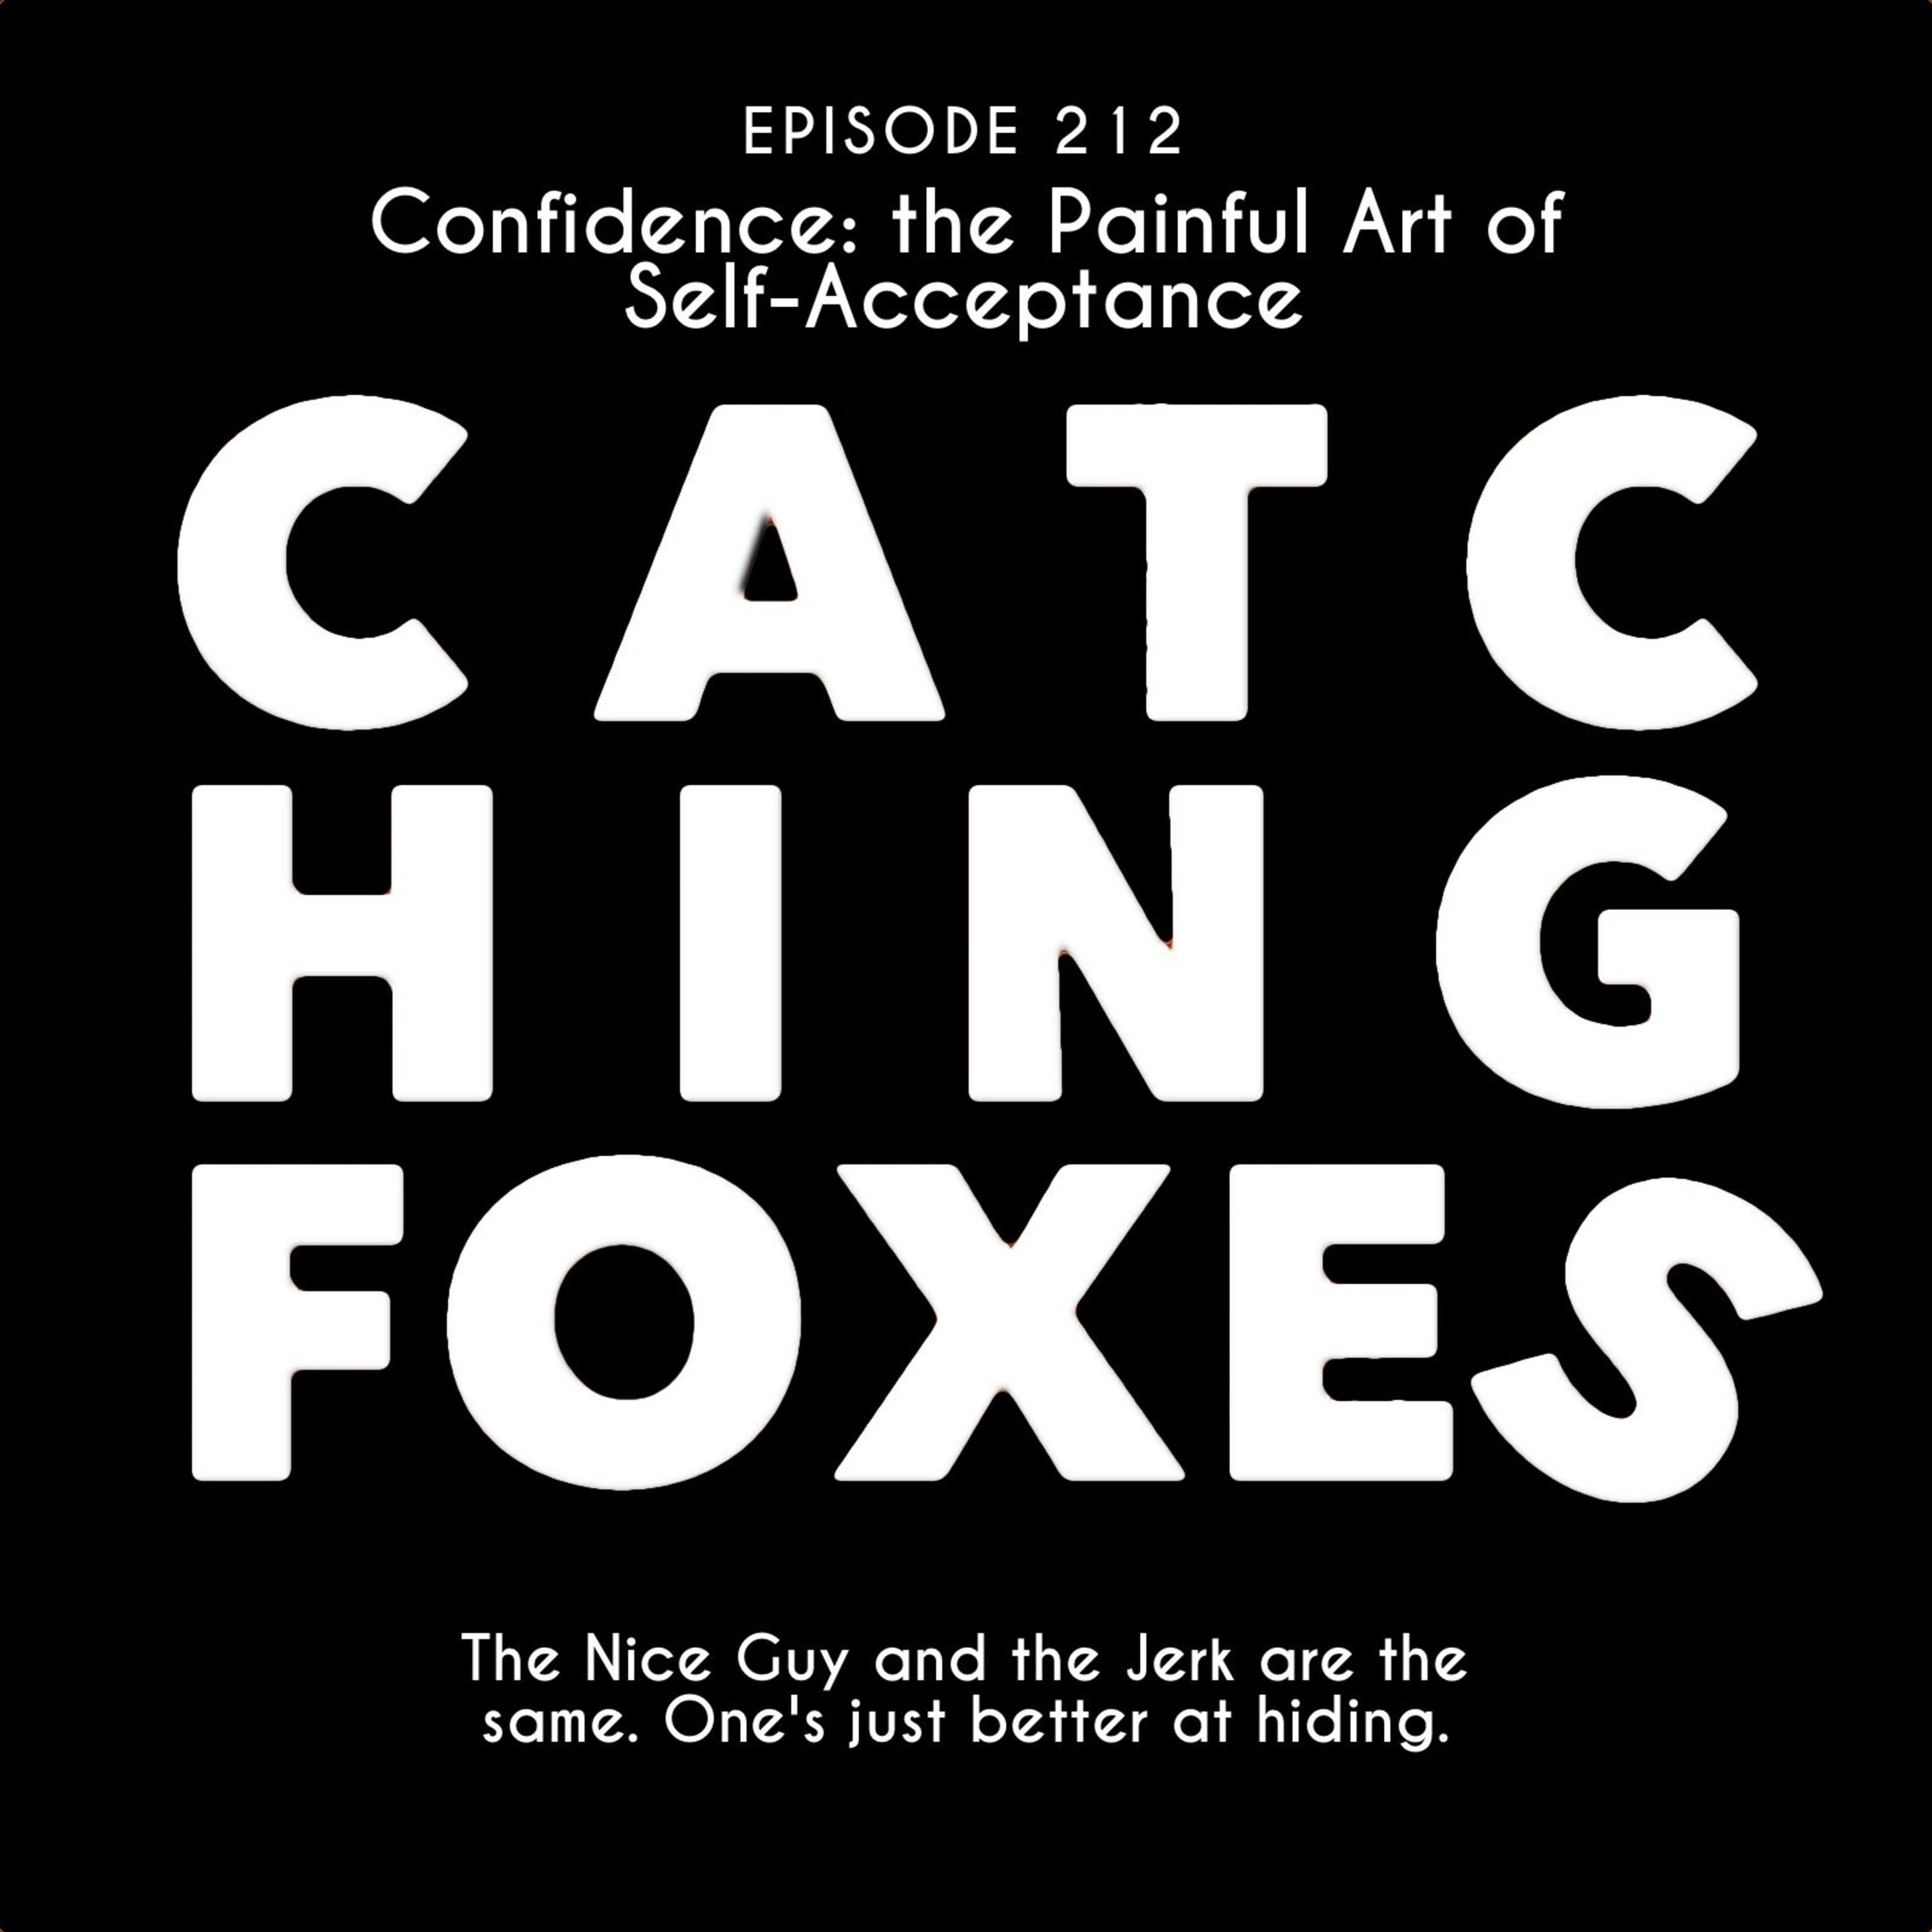 Confidence: Painful Art of Self-Acceptance